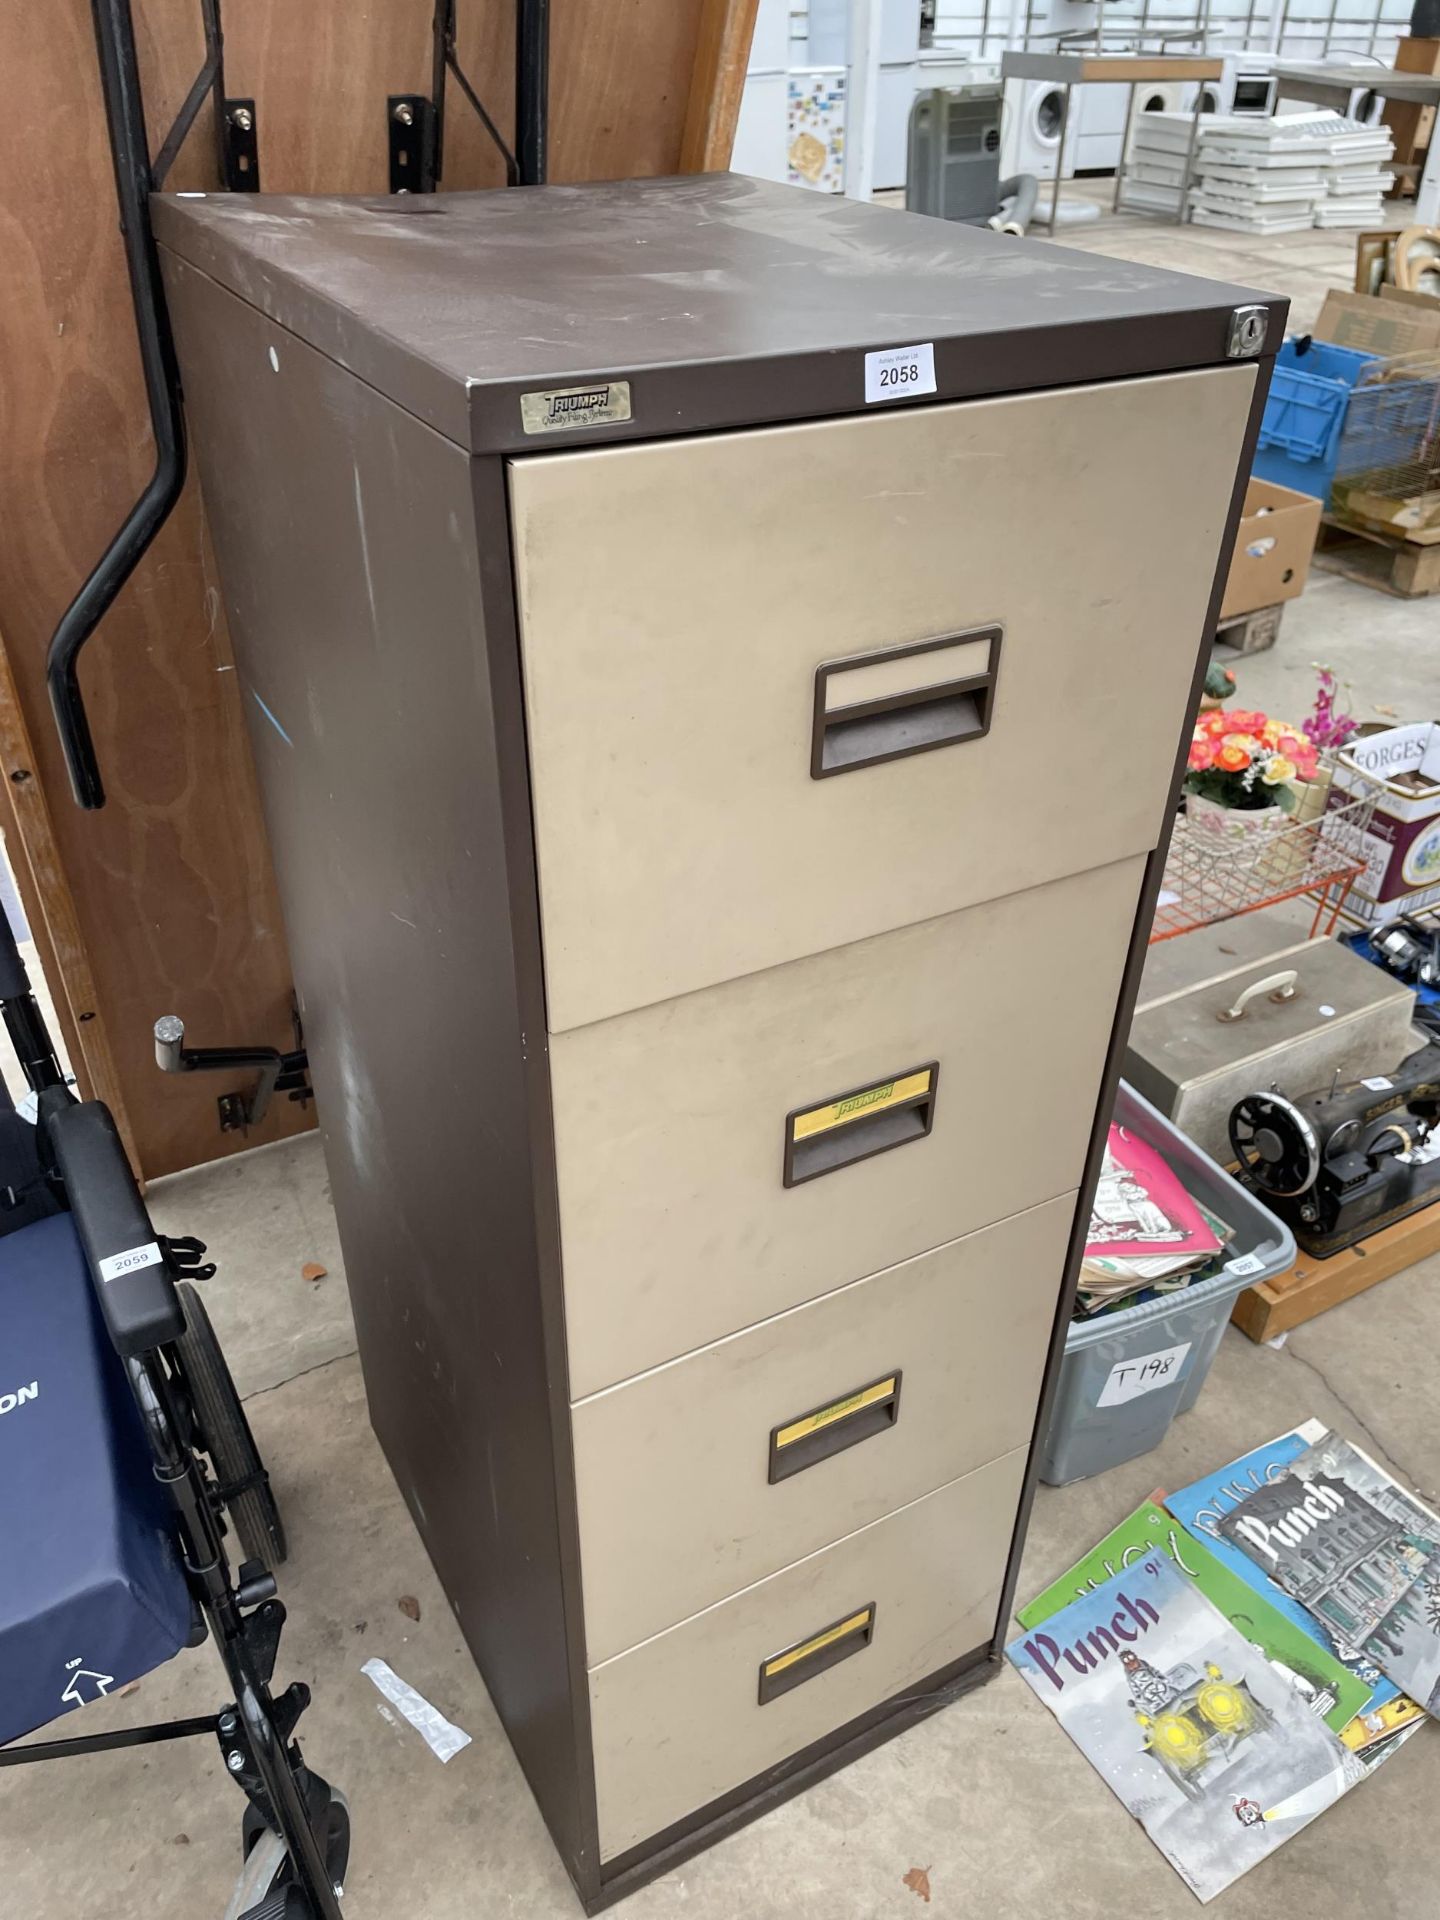 A FOUR DRAWER METAL TRIUMPH FILING CABINET